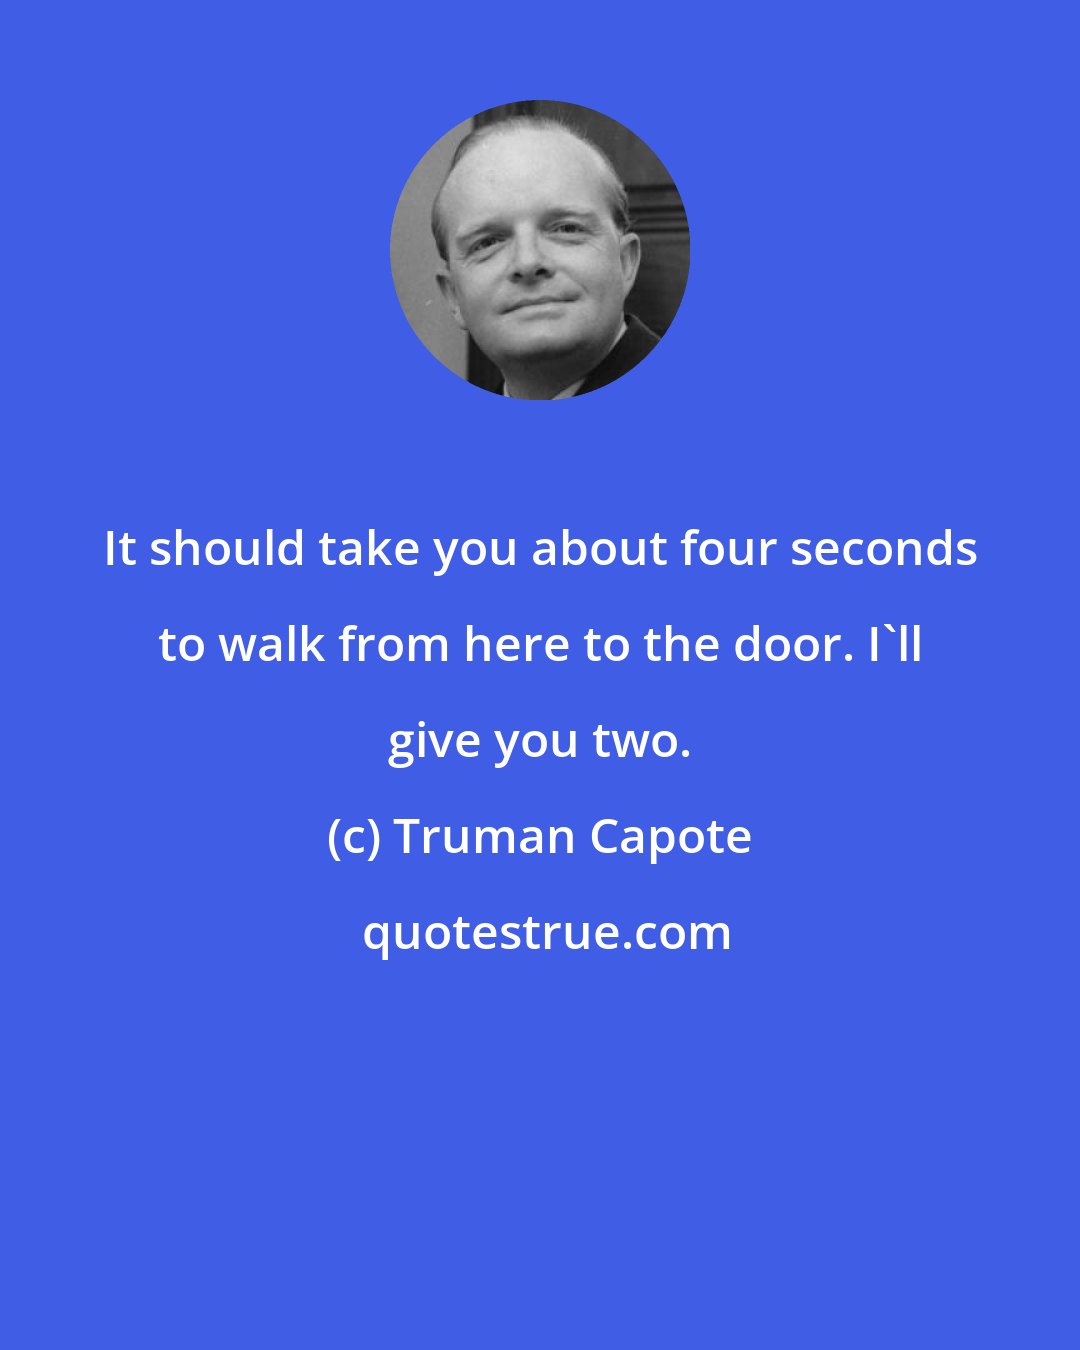 Truman Capote: It should take you about four seconds to walk from here to the door. I'll give you two.